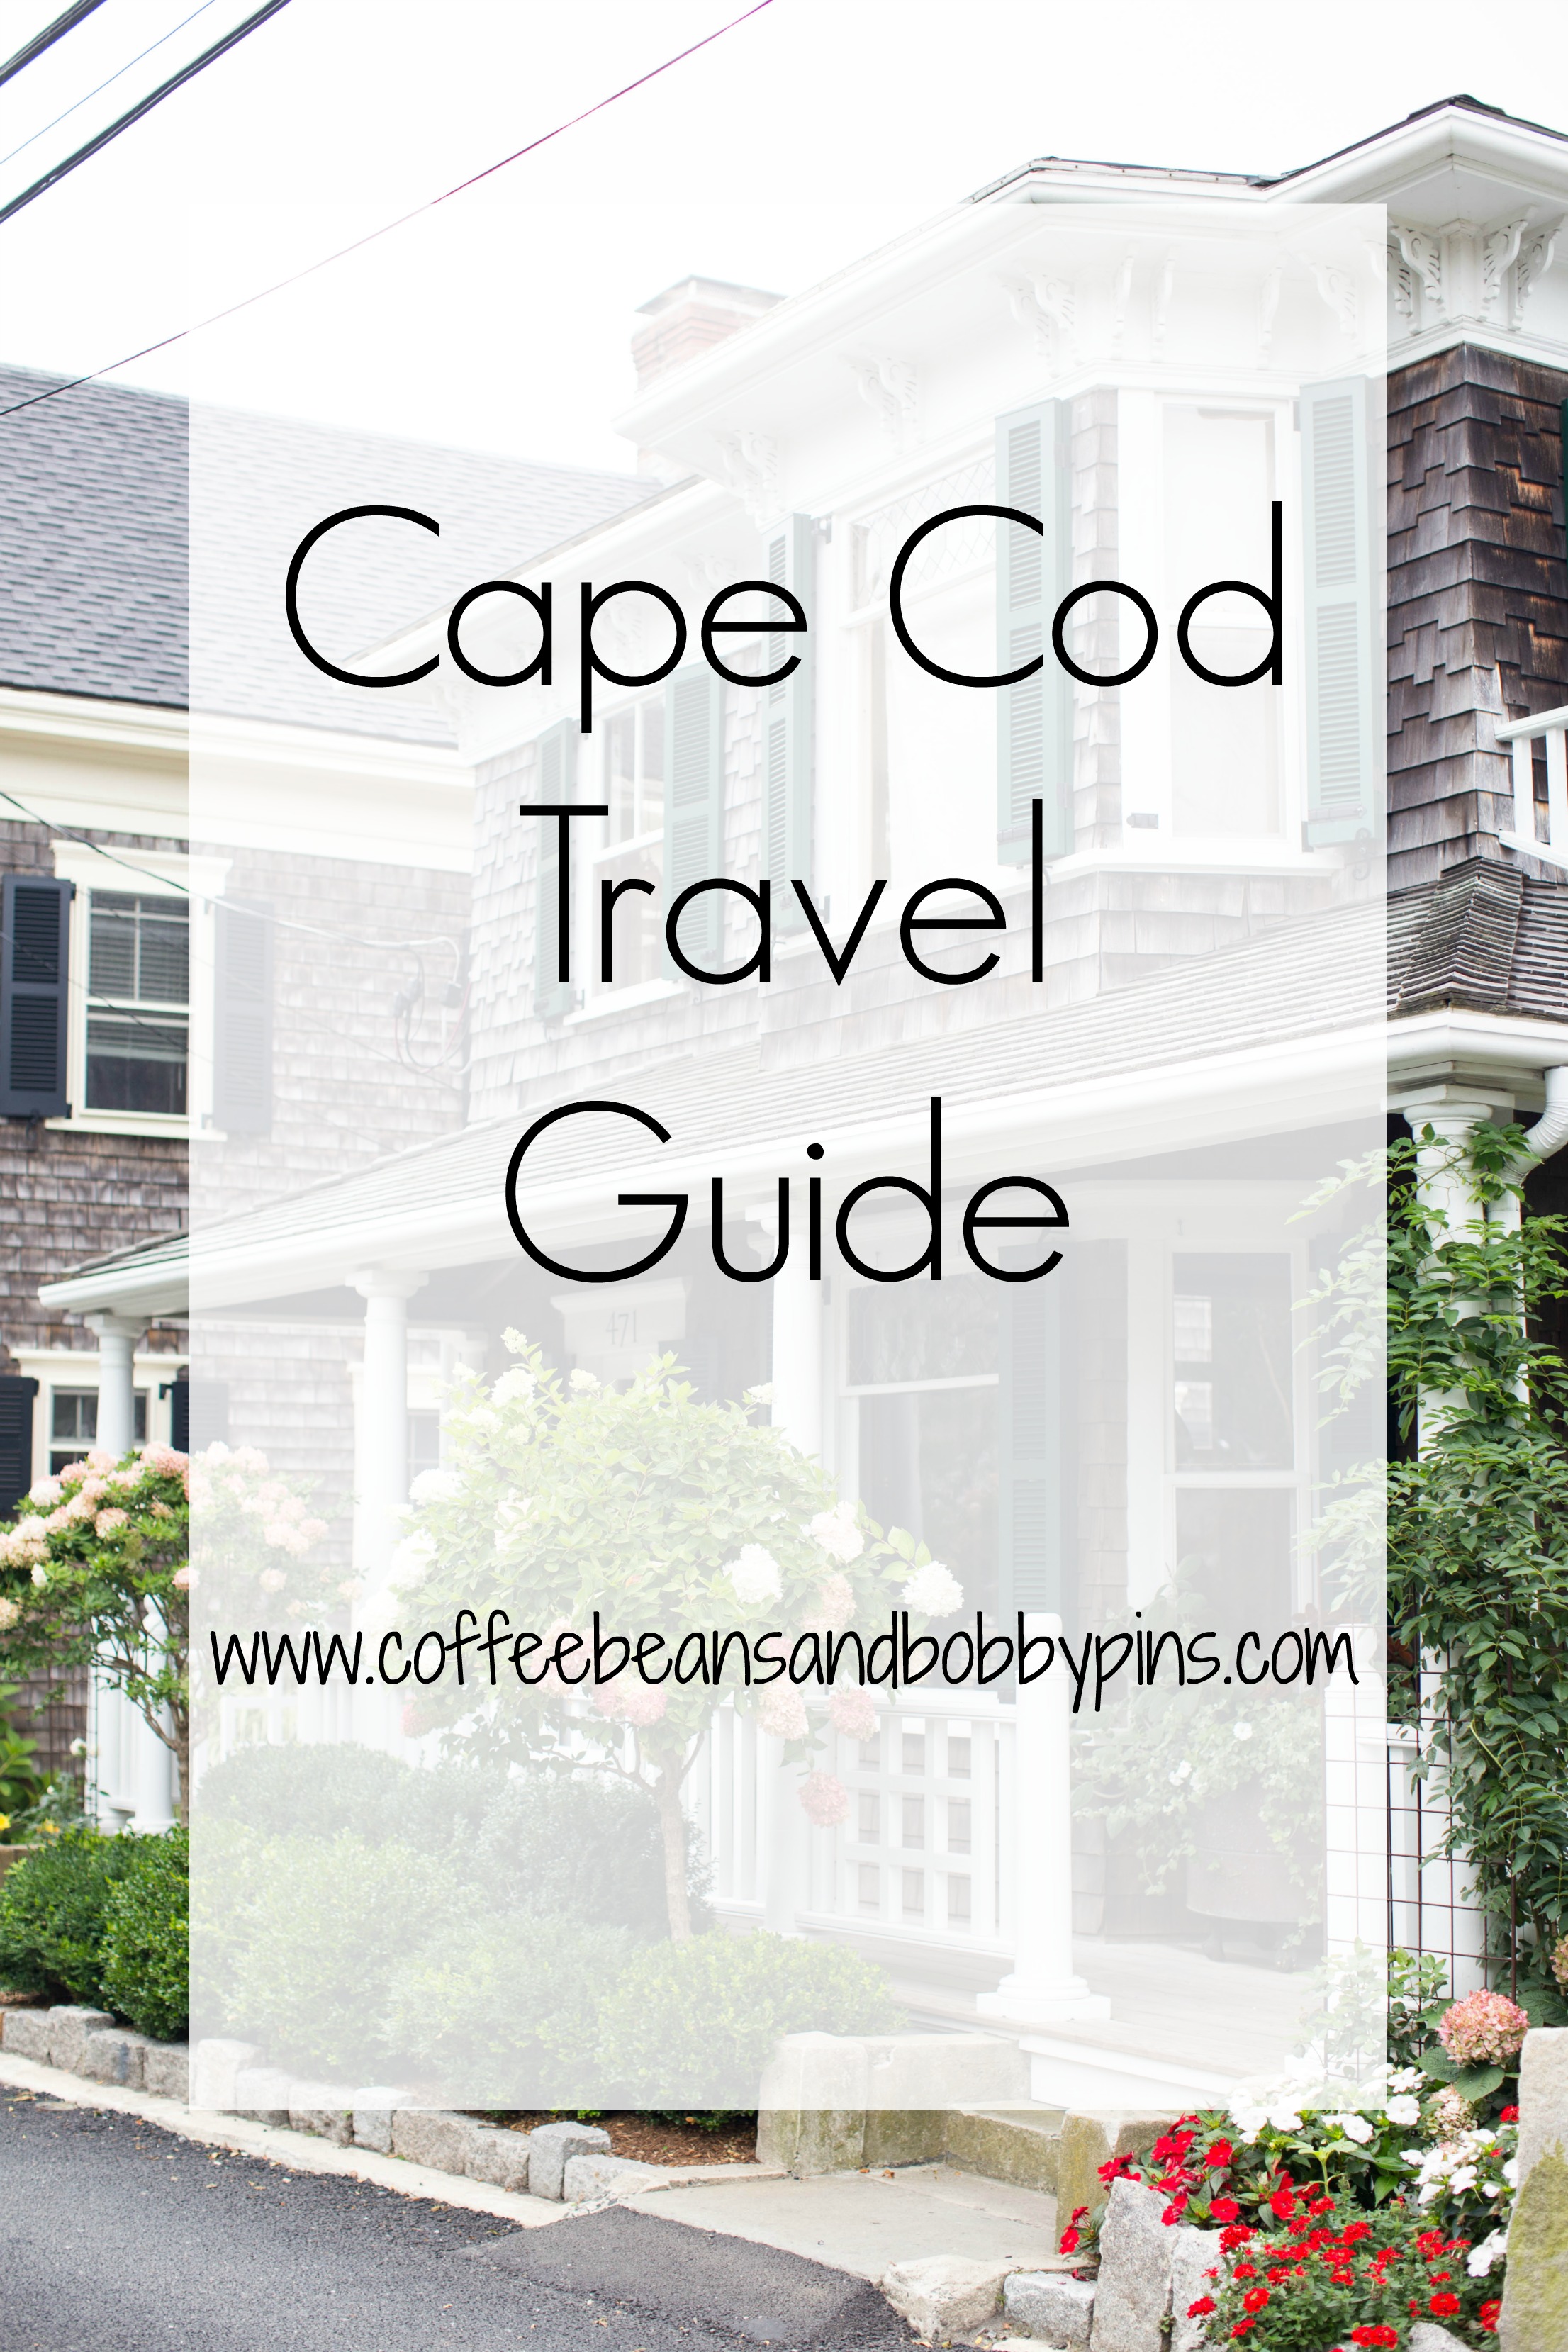 Cape Cod Travel Guide by top North Carolina blogger Coffee Beans and Bobby Pins